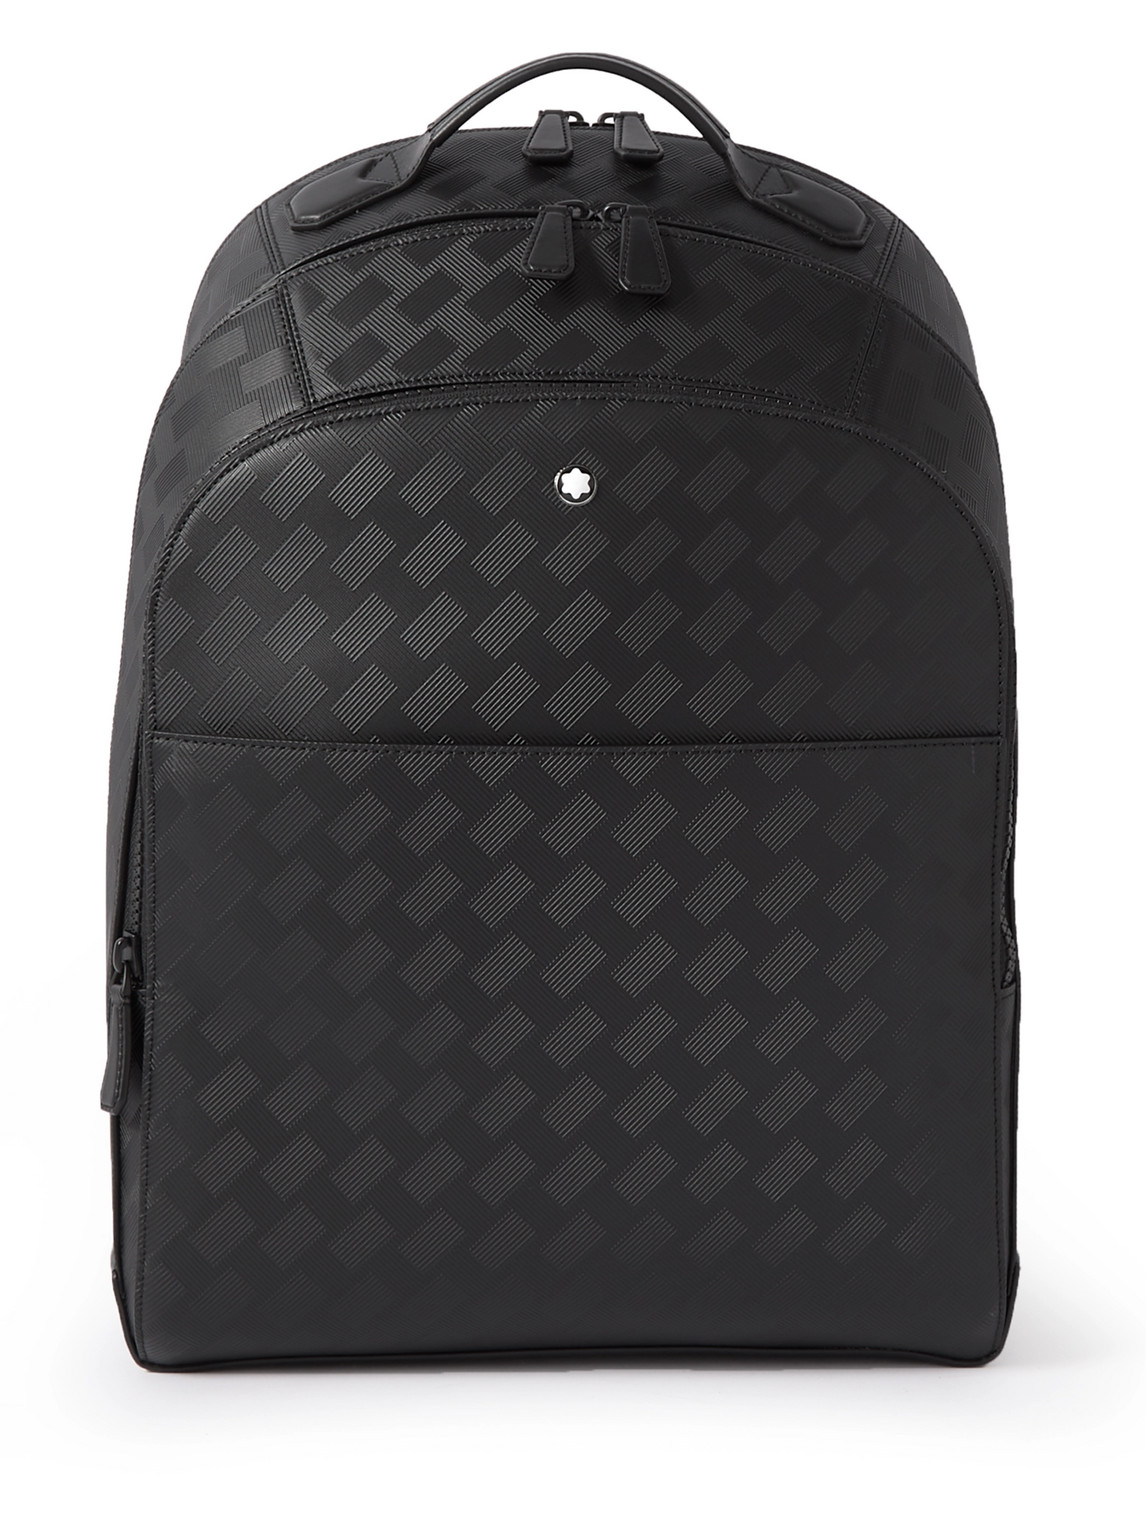 MONTBLANC EXTREME 3.0 LARGE CROSS-GRAIN LEATHER BACKPACK